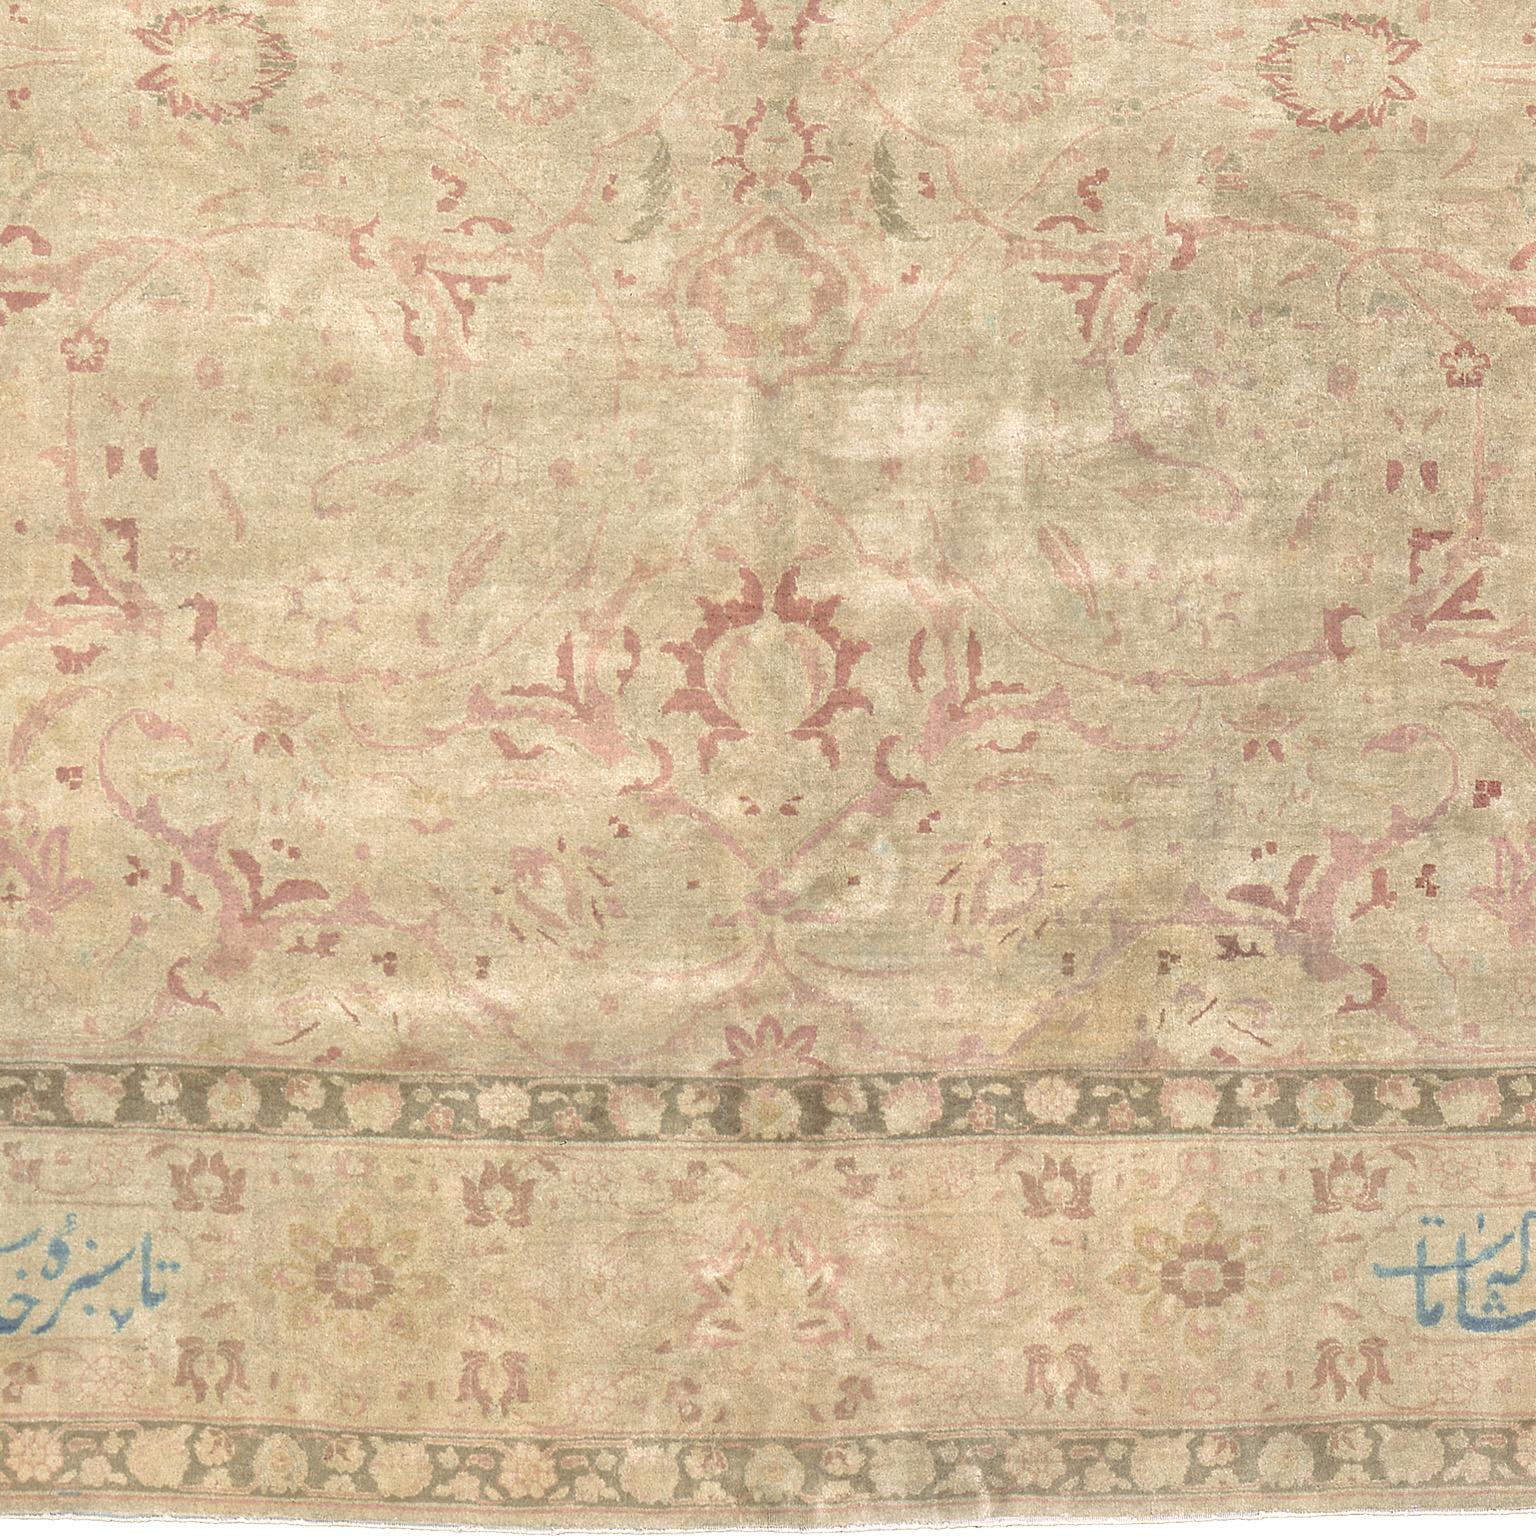 Early 20th Century Indo-Persian Rug In Good Condition For Sale In New York, NY